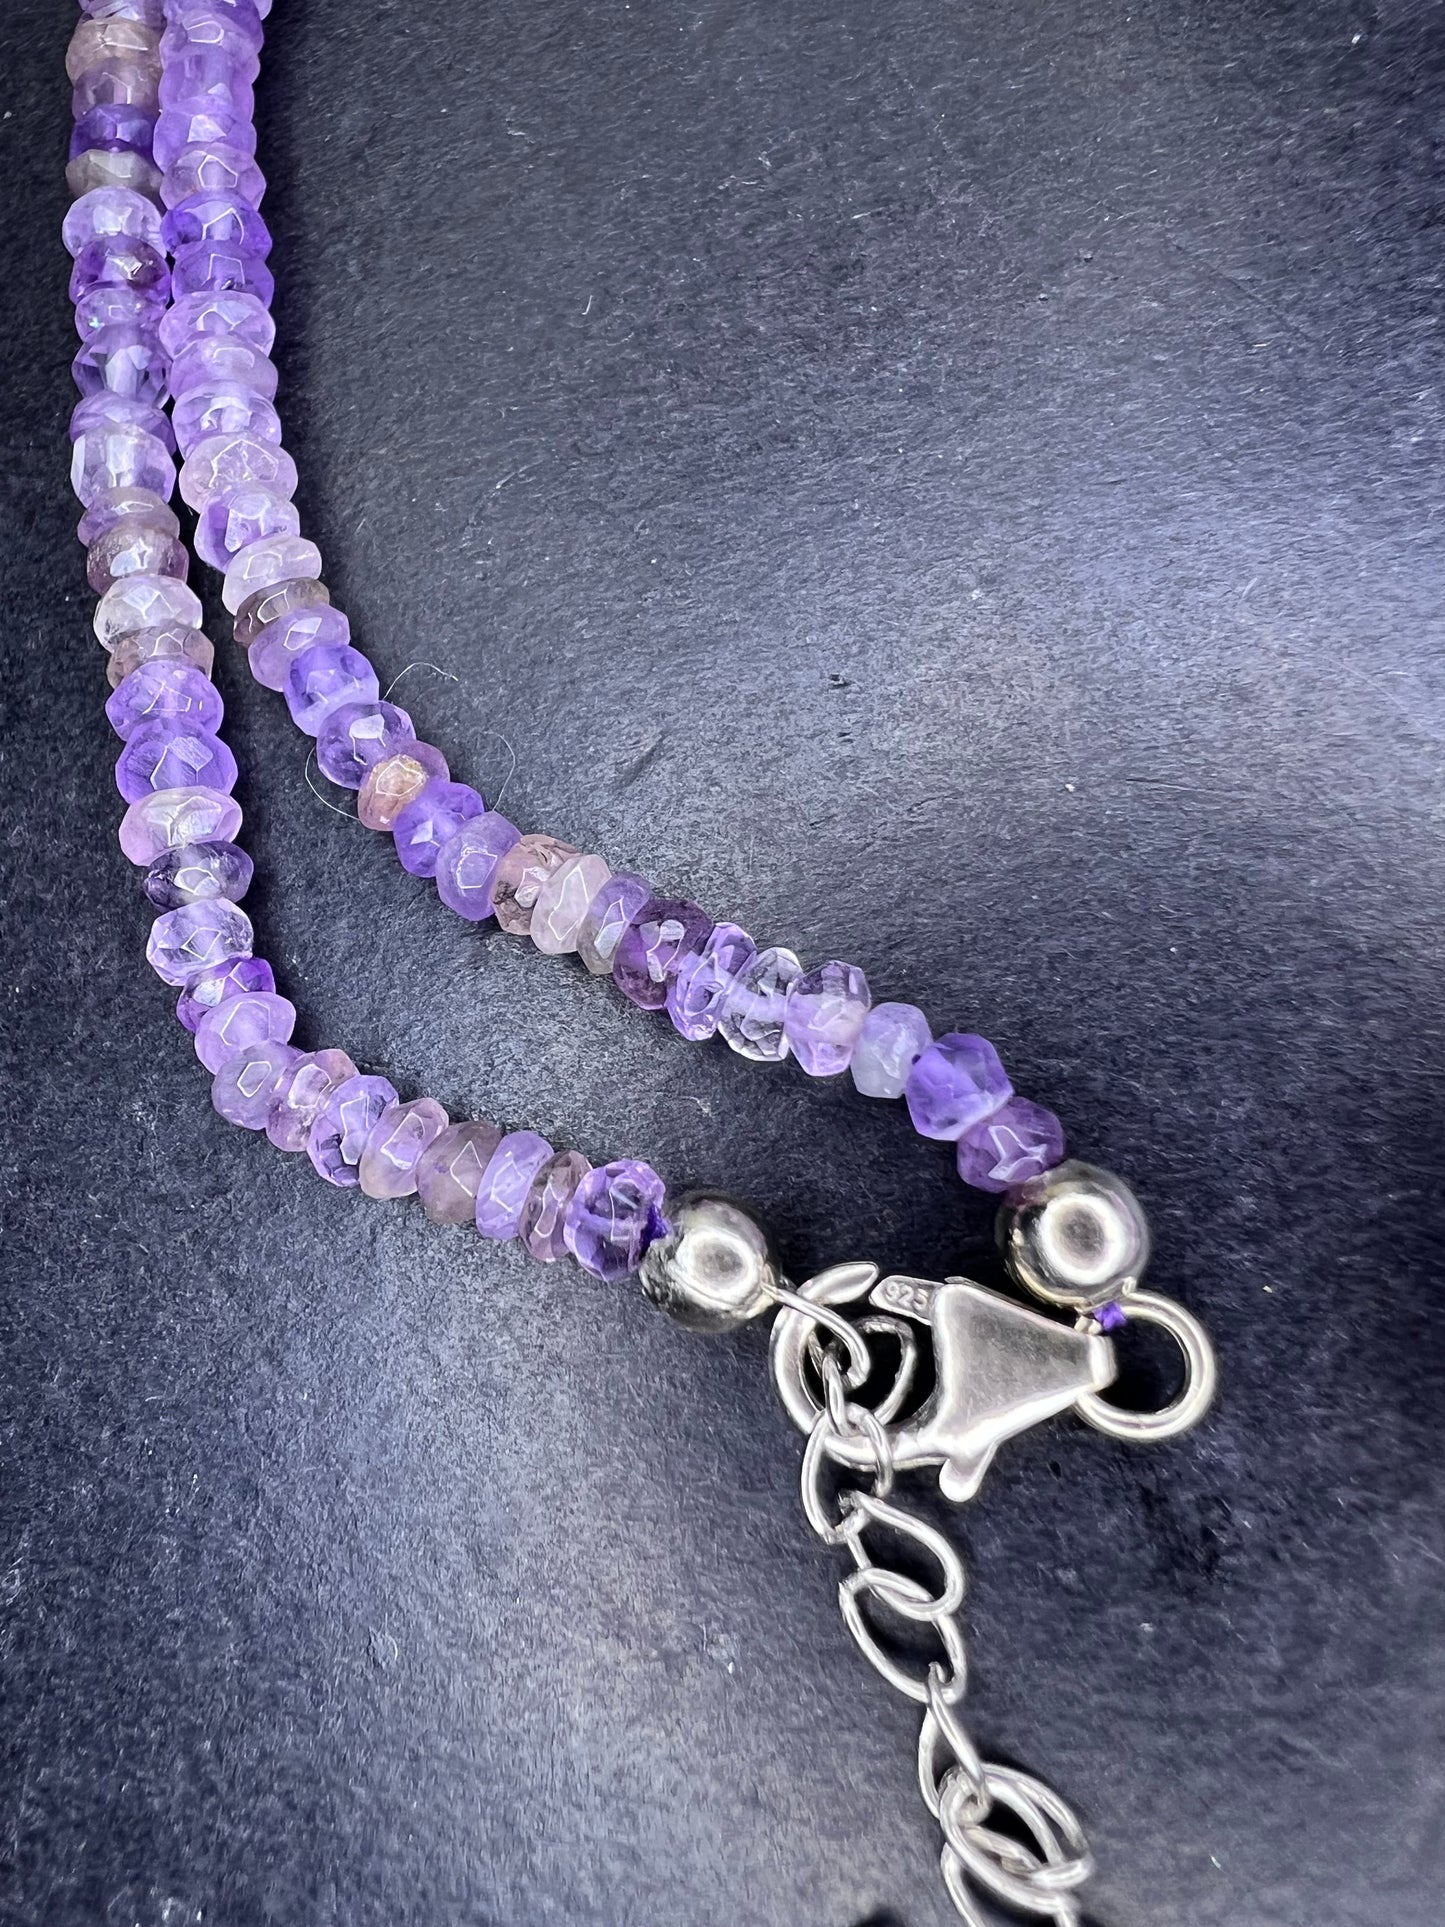 *NEW* Ametrine necklace with sterling silver clasp